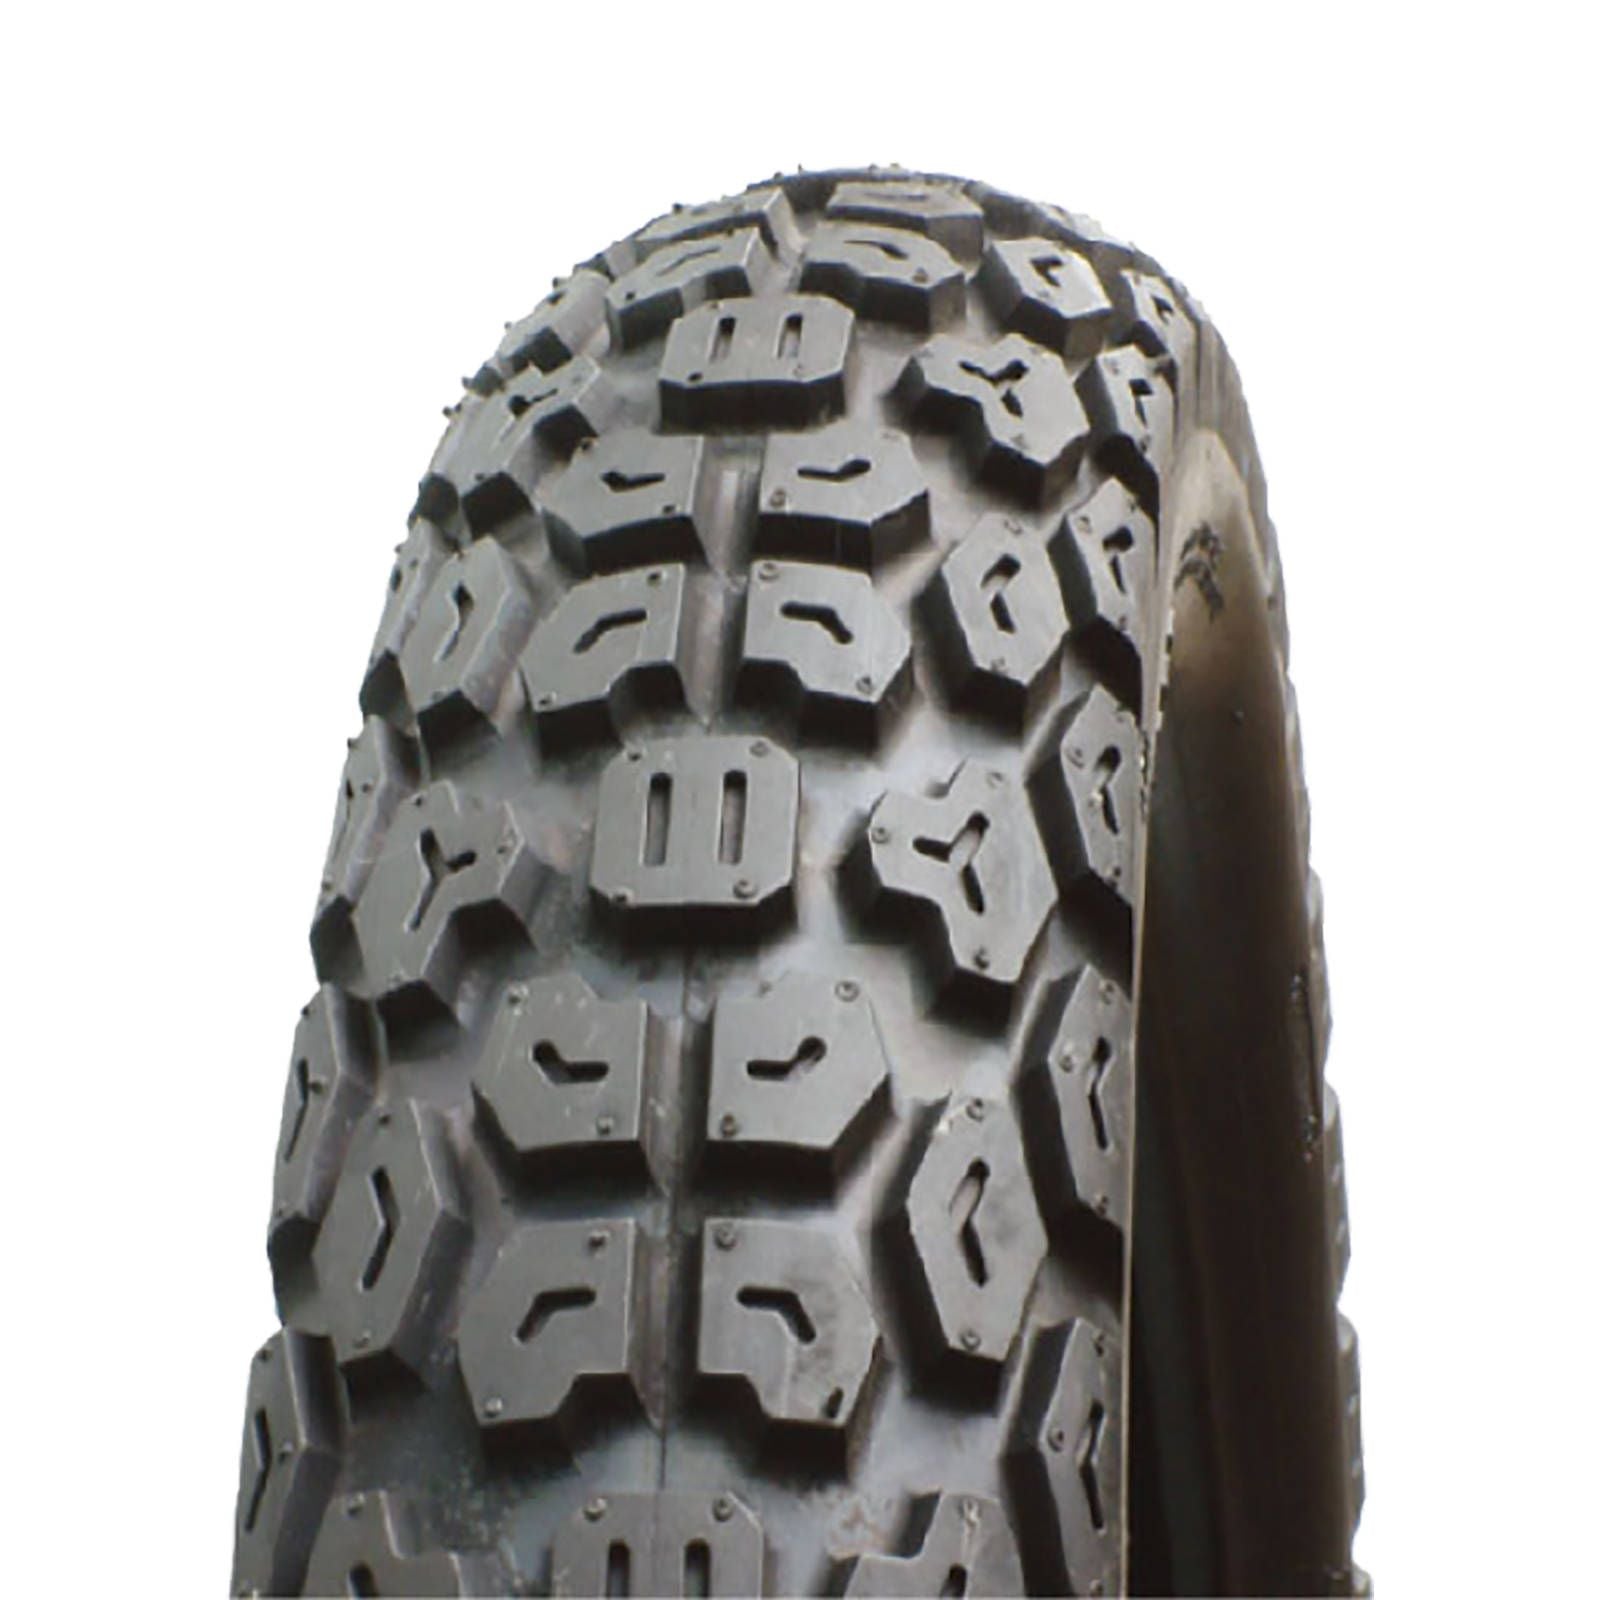 New ANLIDA Motorcycle Tyre F889 275x17 Trail #17X275F889